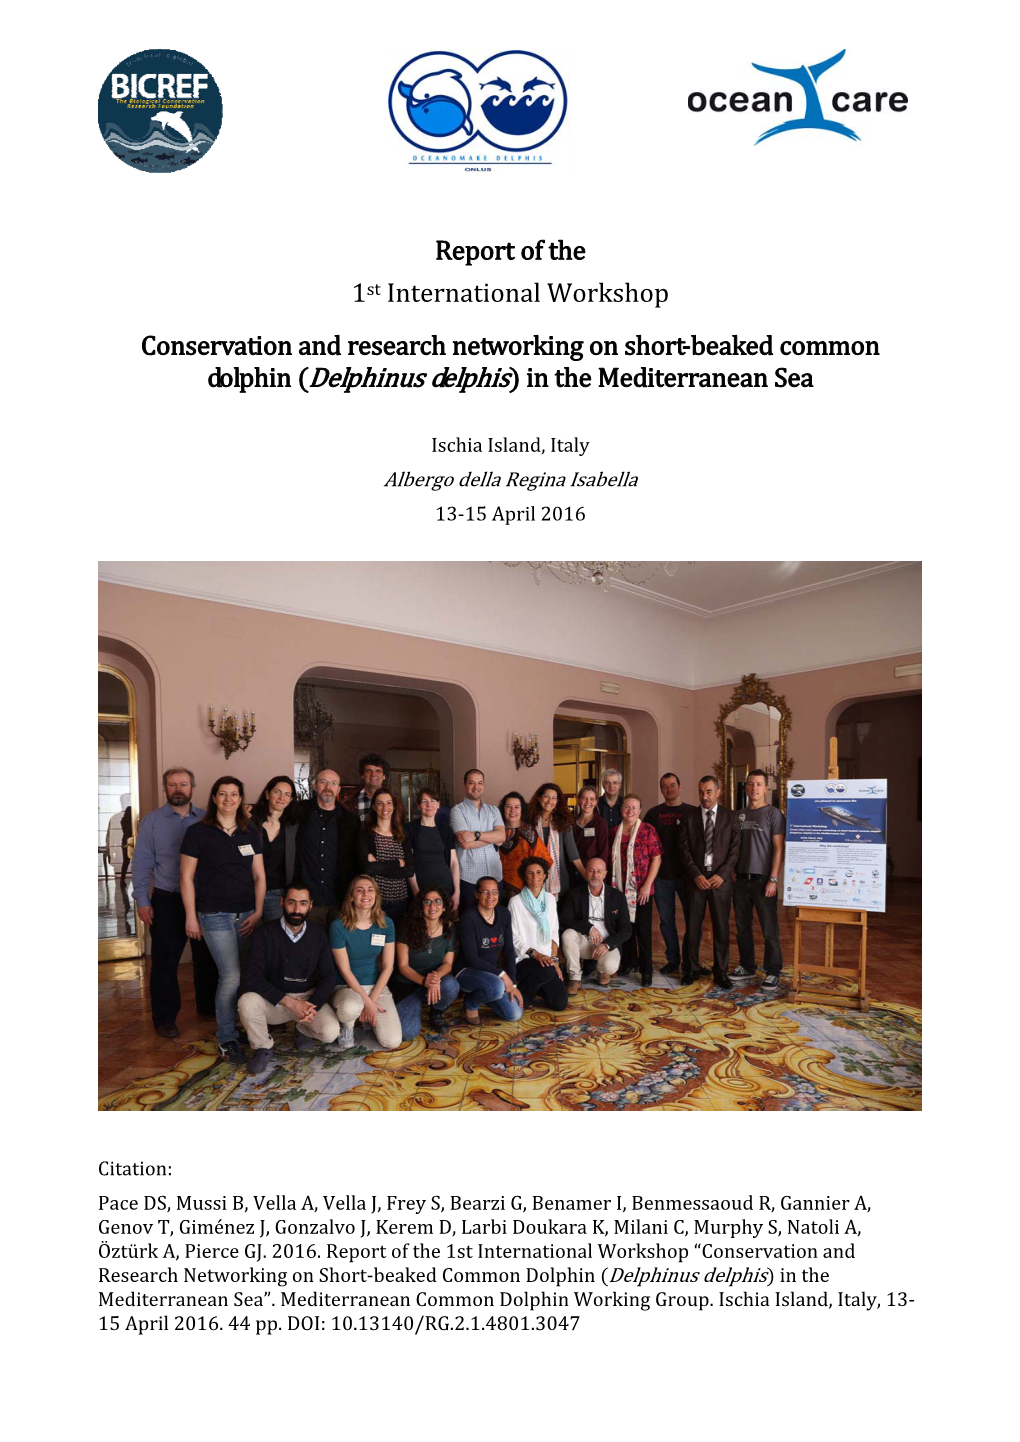 Report of the 1St International Workshop Conservation and Research Networking on Short‐Beaked Common Dolphin �Delphinus Delphis� in the Mediterranean Sea